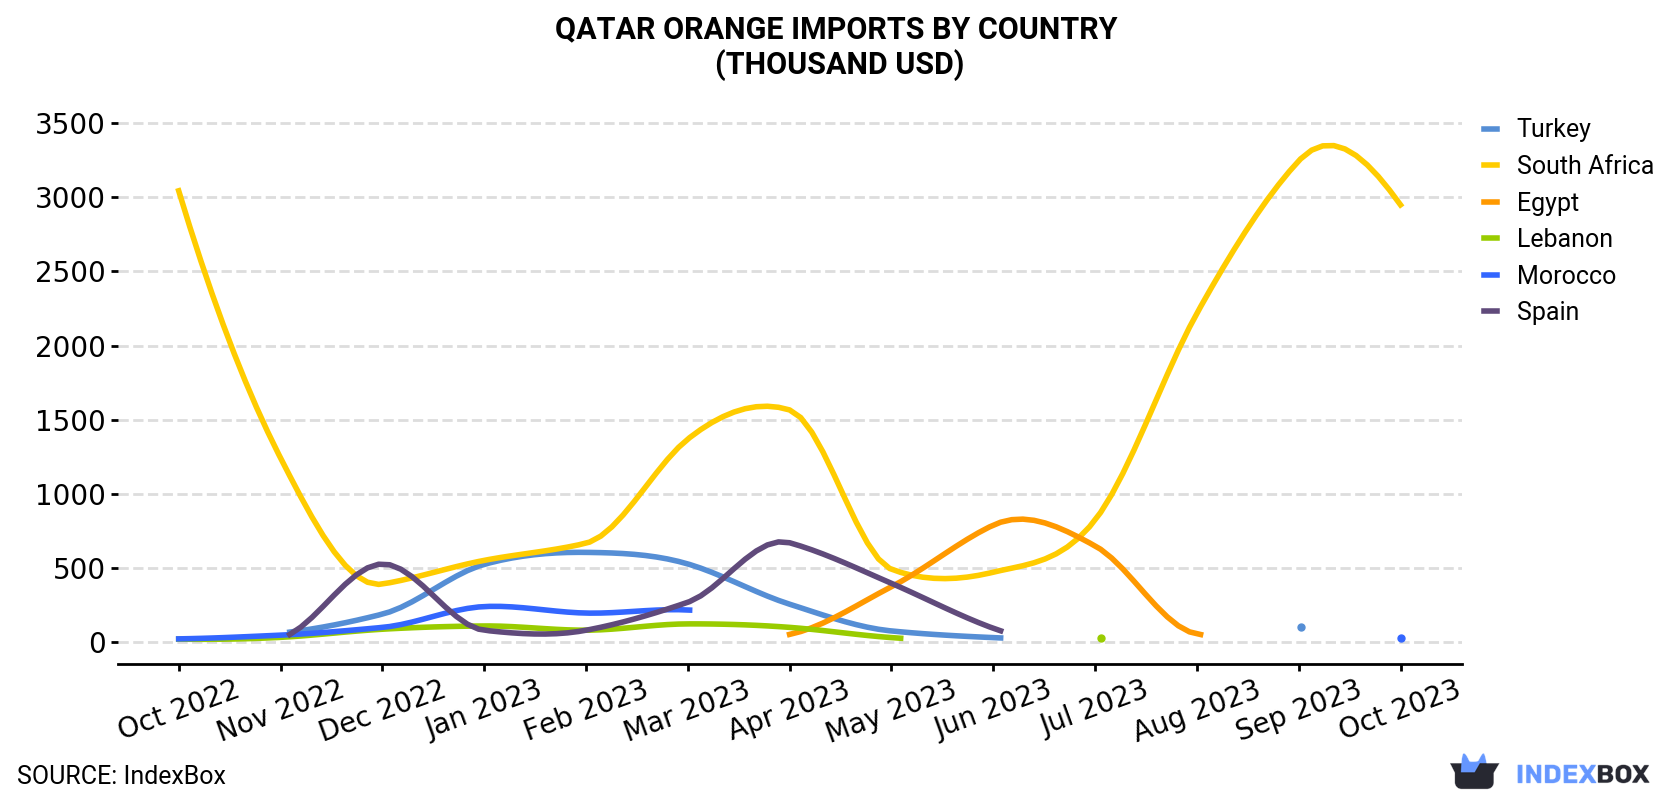 Qatar Orange Imports By Country (Thousand USD)